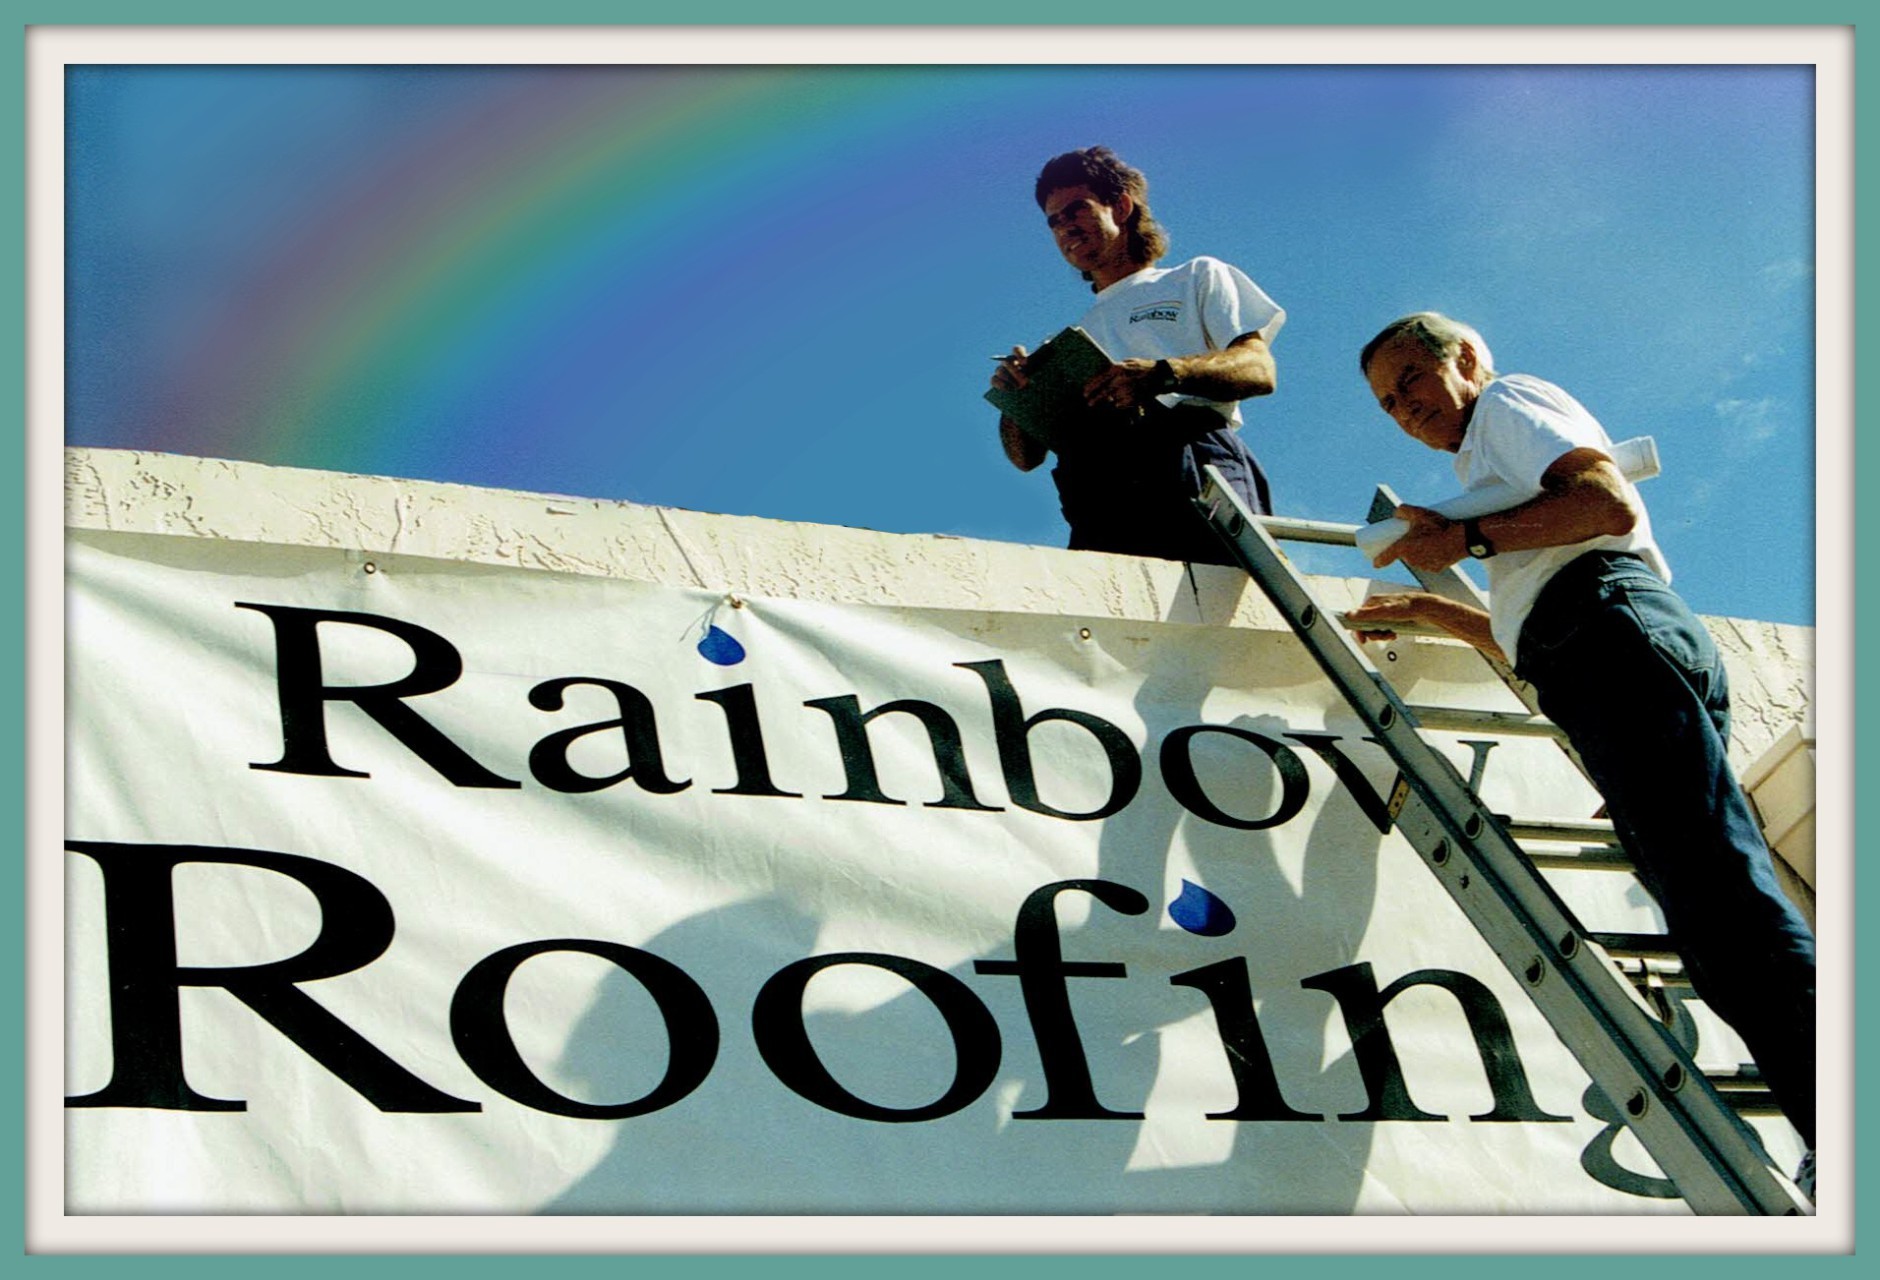 Building Rainbow Roofing with Dad